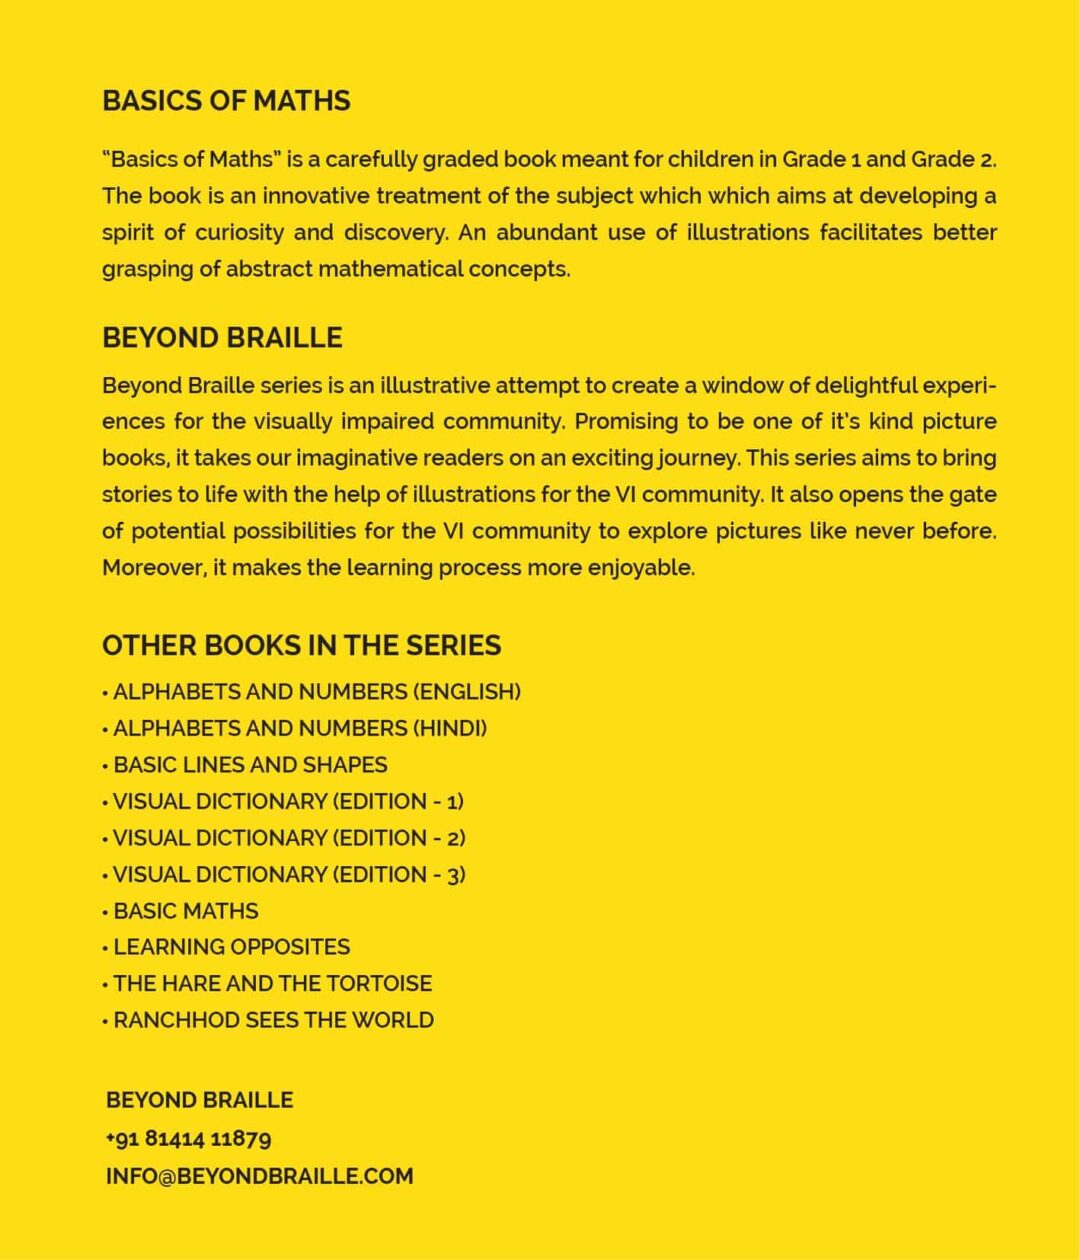 A brief information about basic maths book also a brief introduction about beyond braille brand and a list of other books from the brand